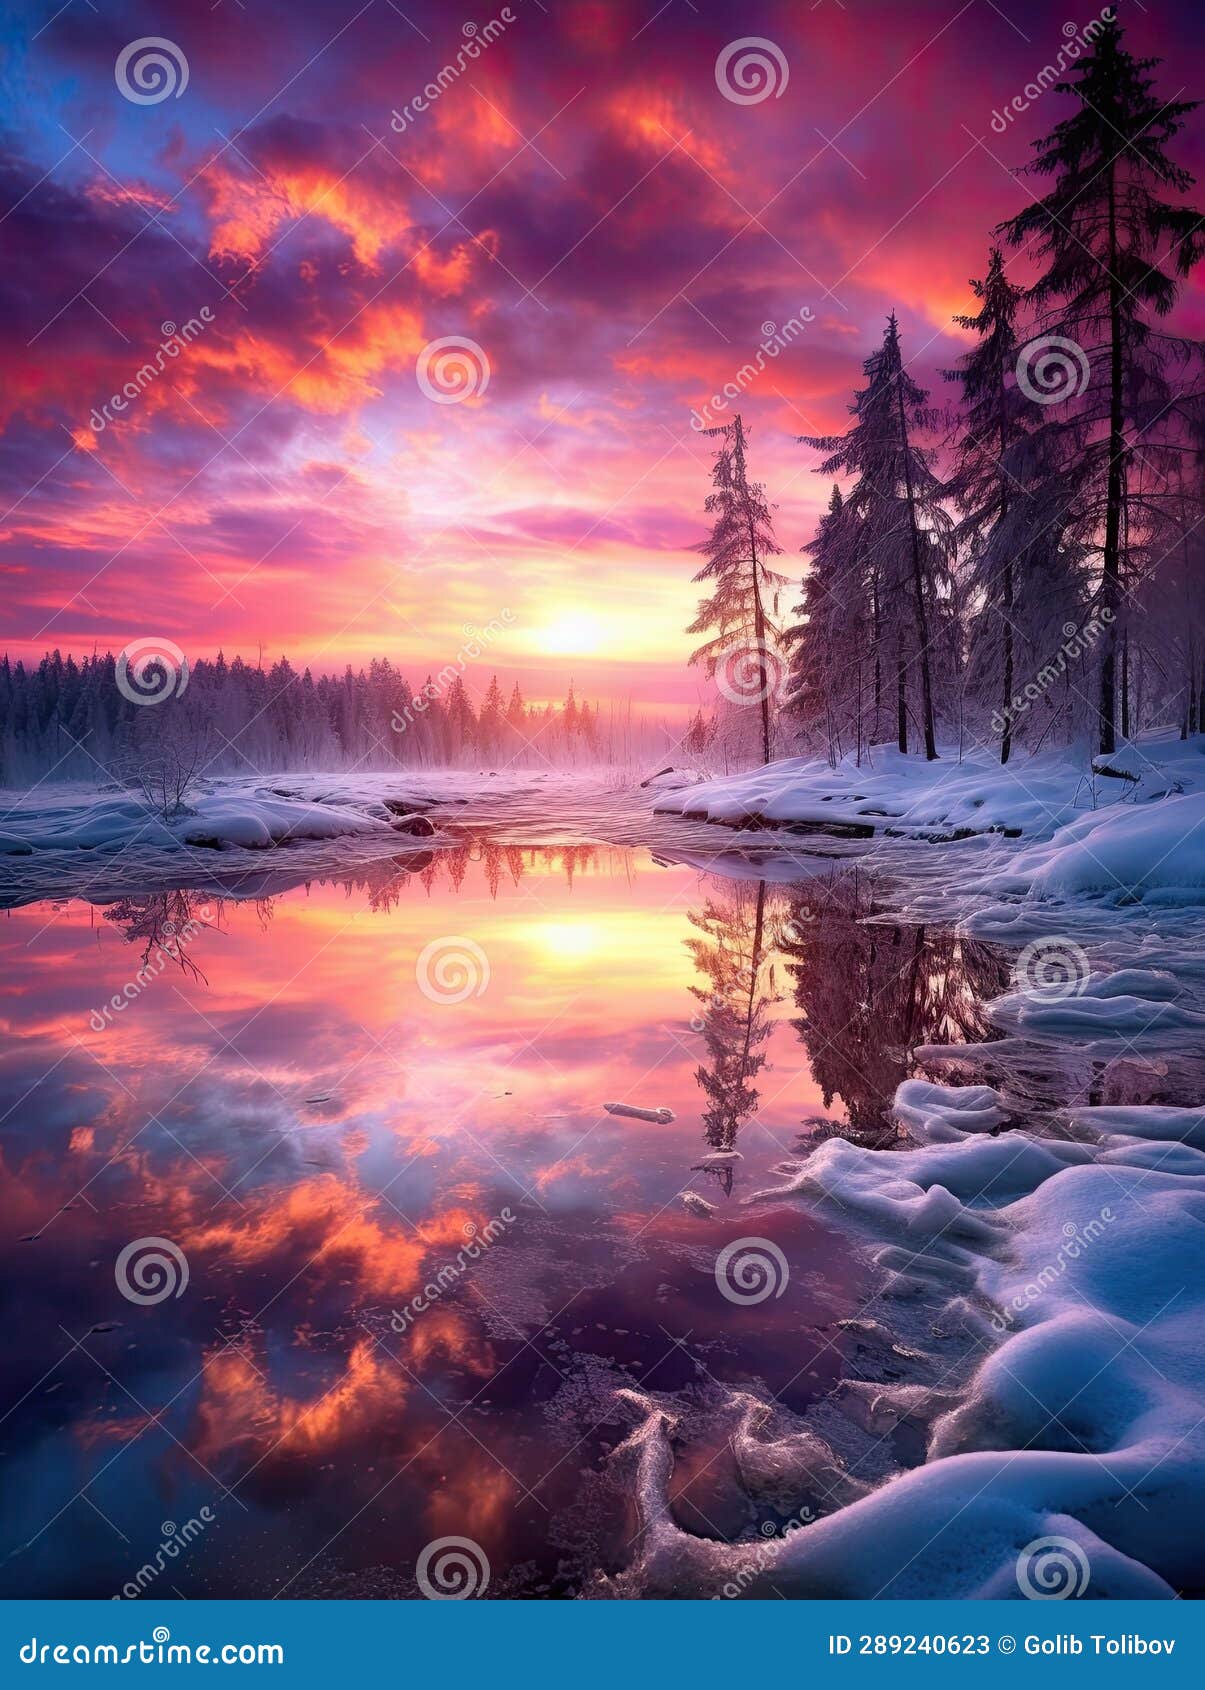 A Reflection of a Sunset in a River in Winter Stock Image - Image of ...